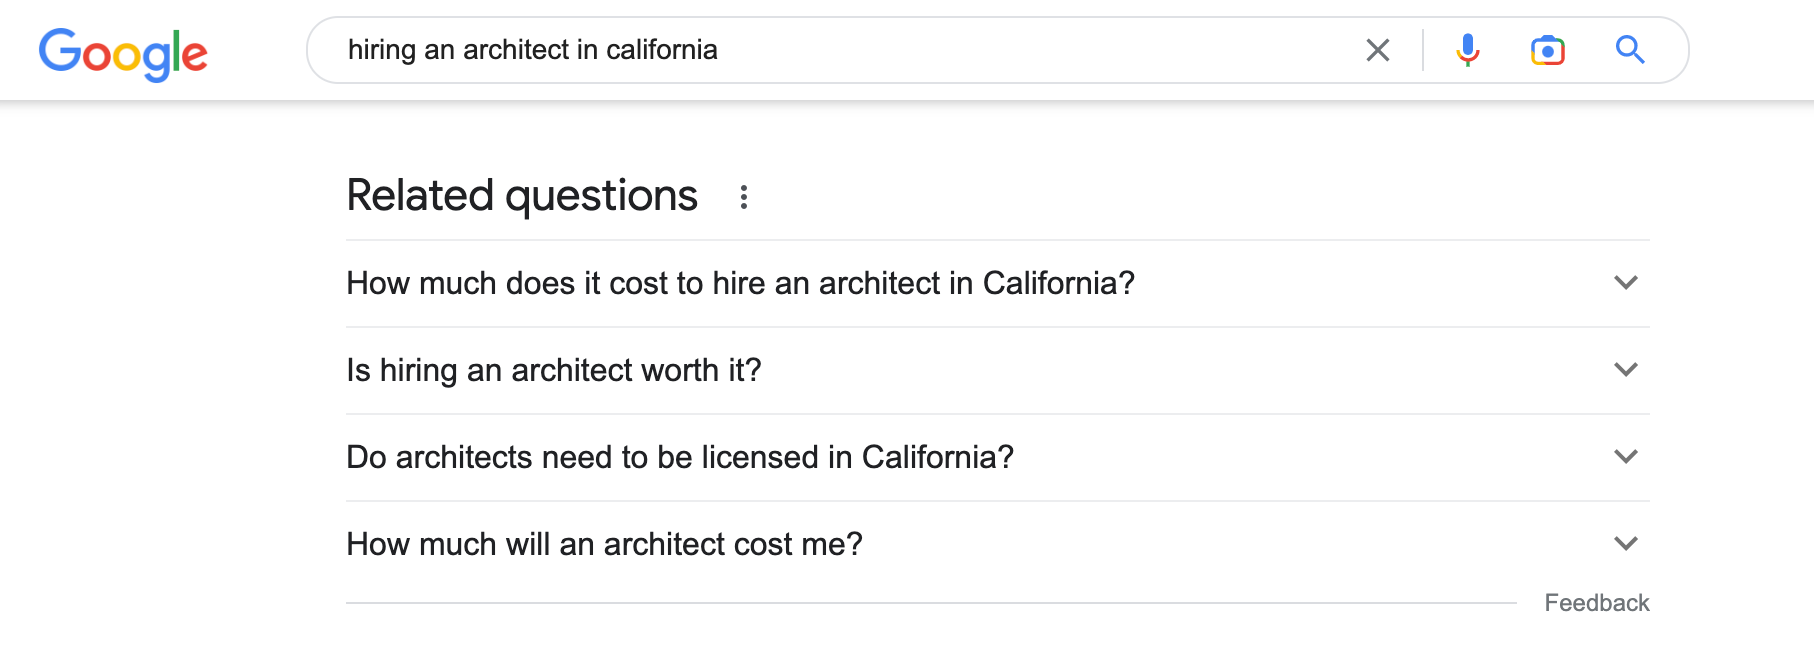 Screenshot of a Google search for "hiring an architect"